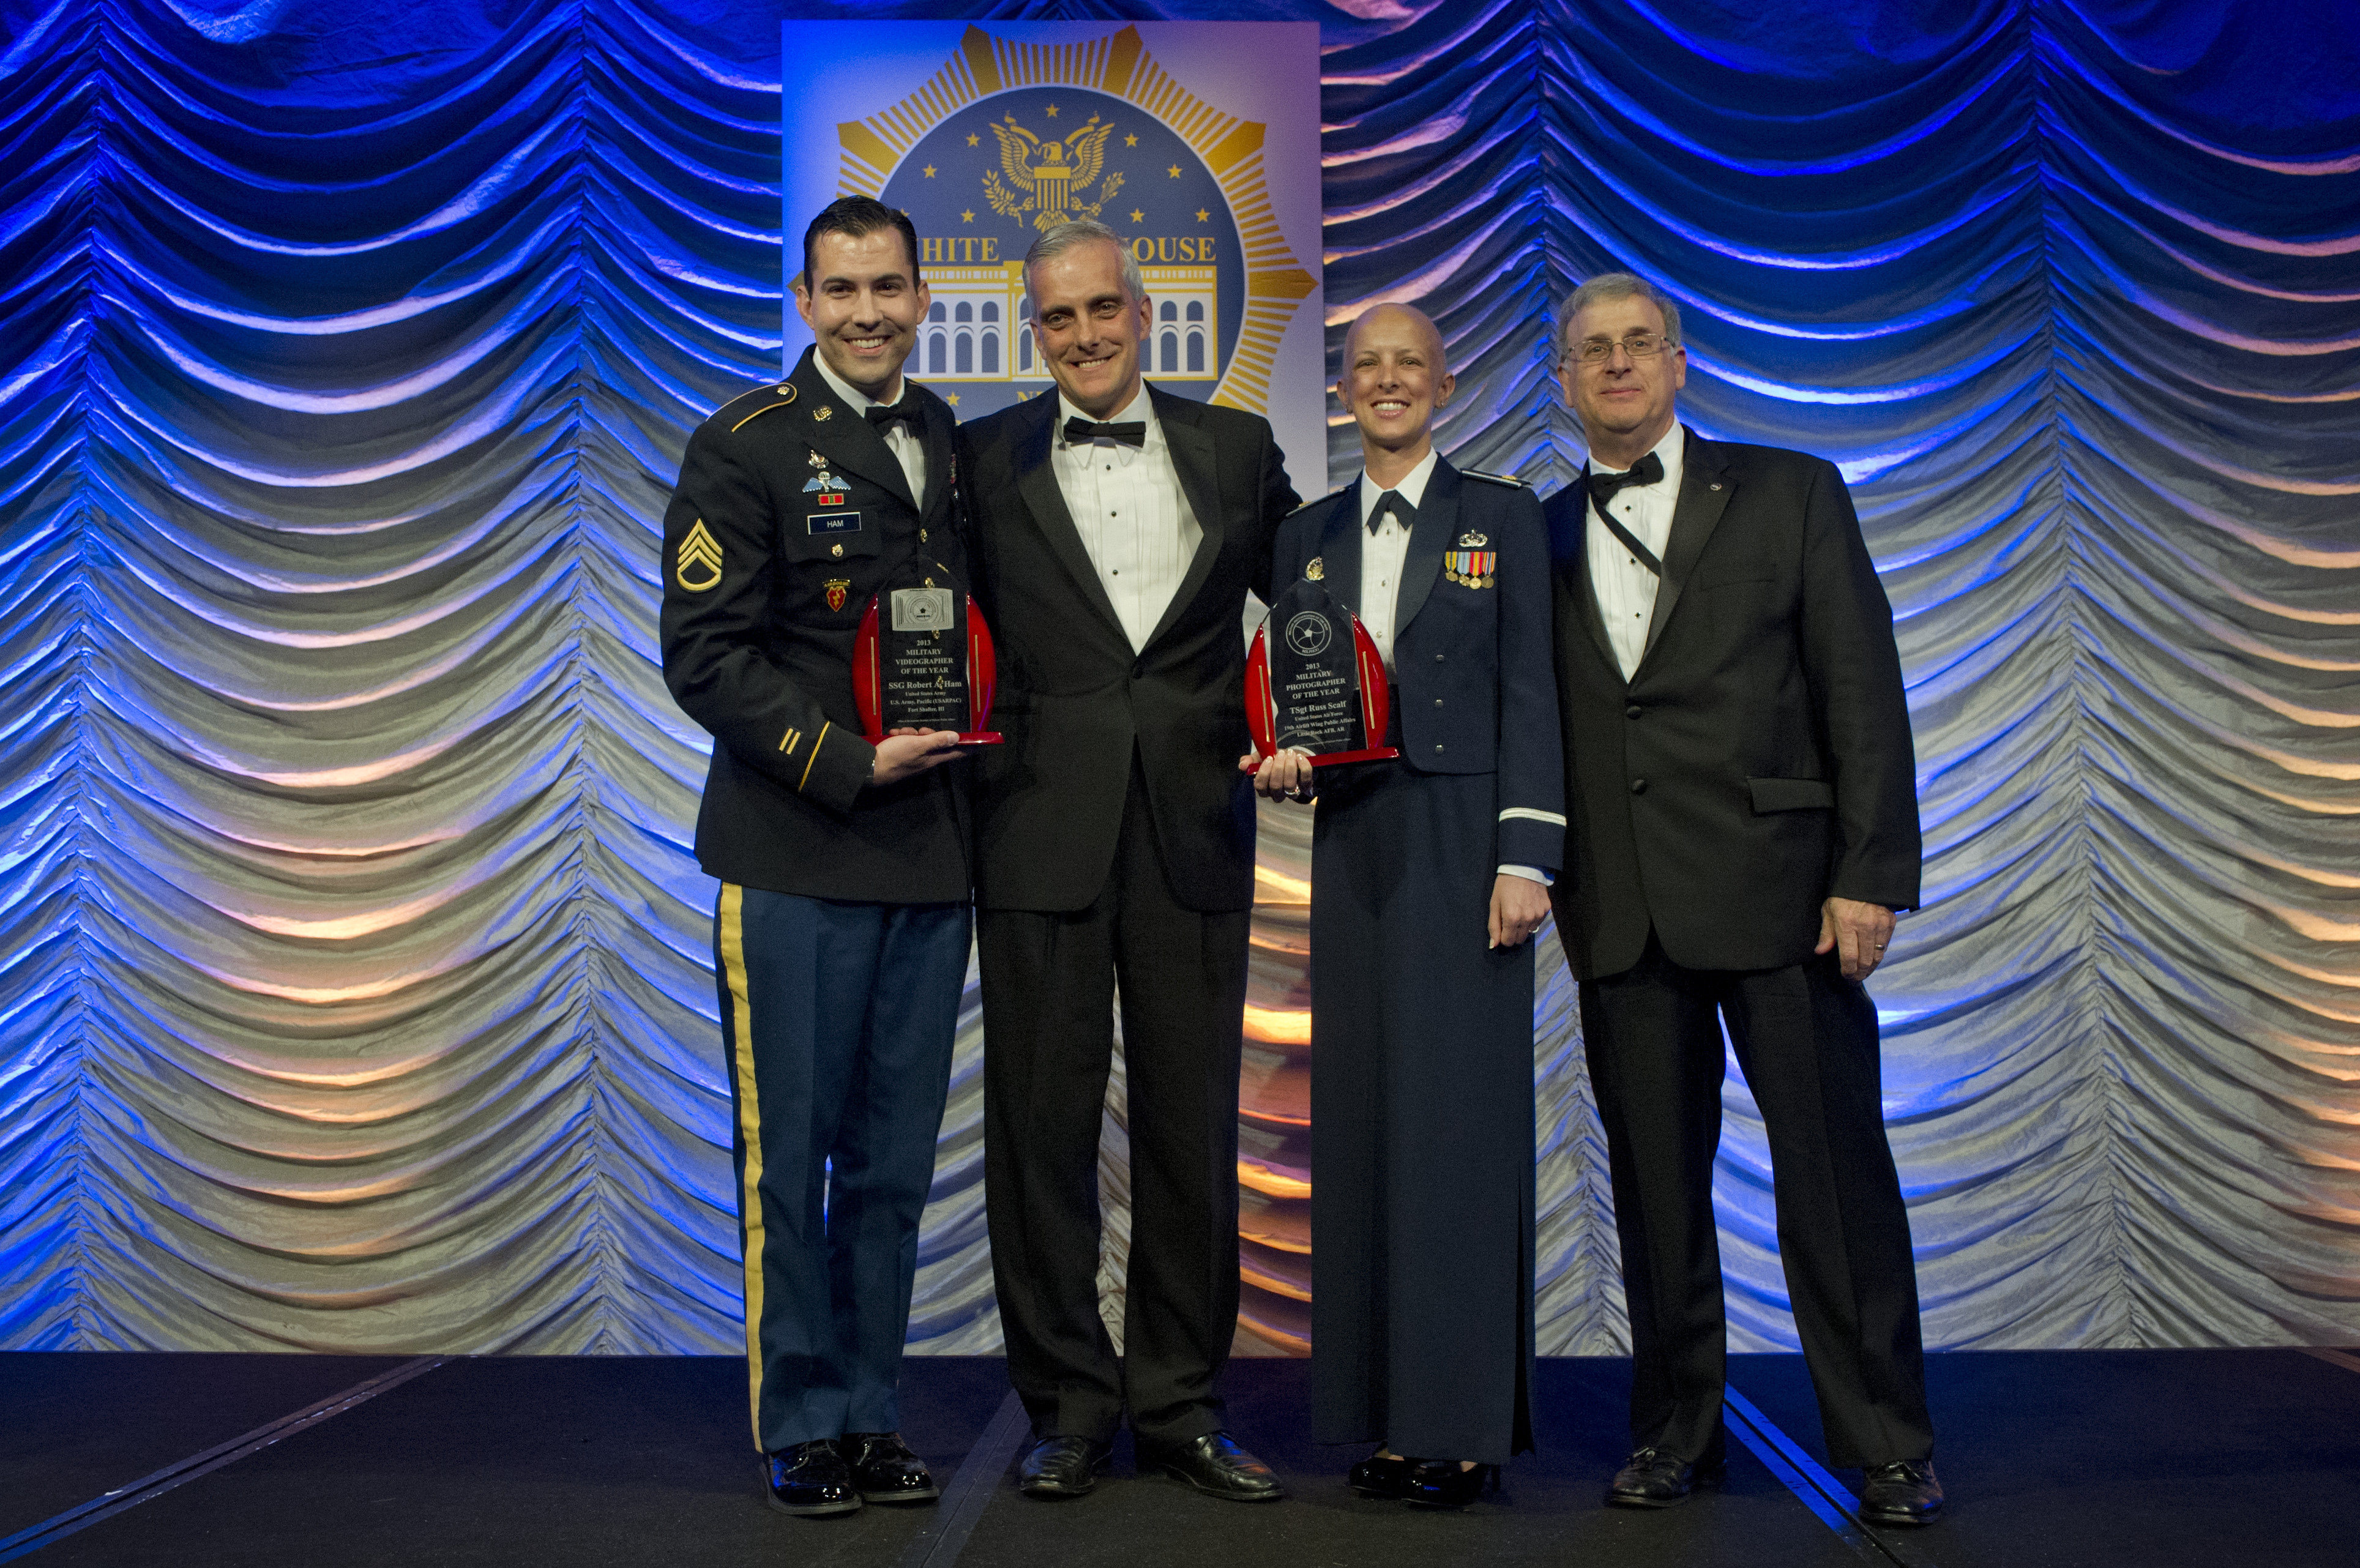 Robert receiving the Military Videographer of the Year in Washington D.C., 2013.